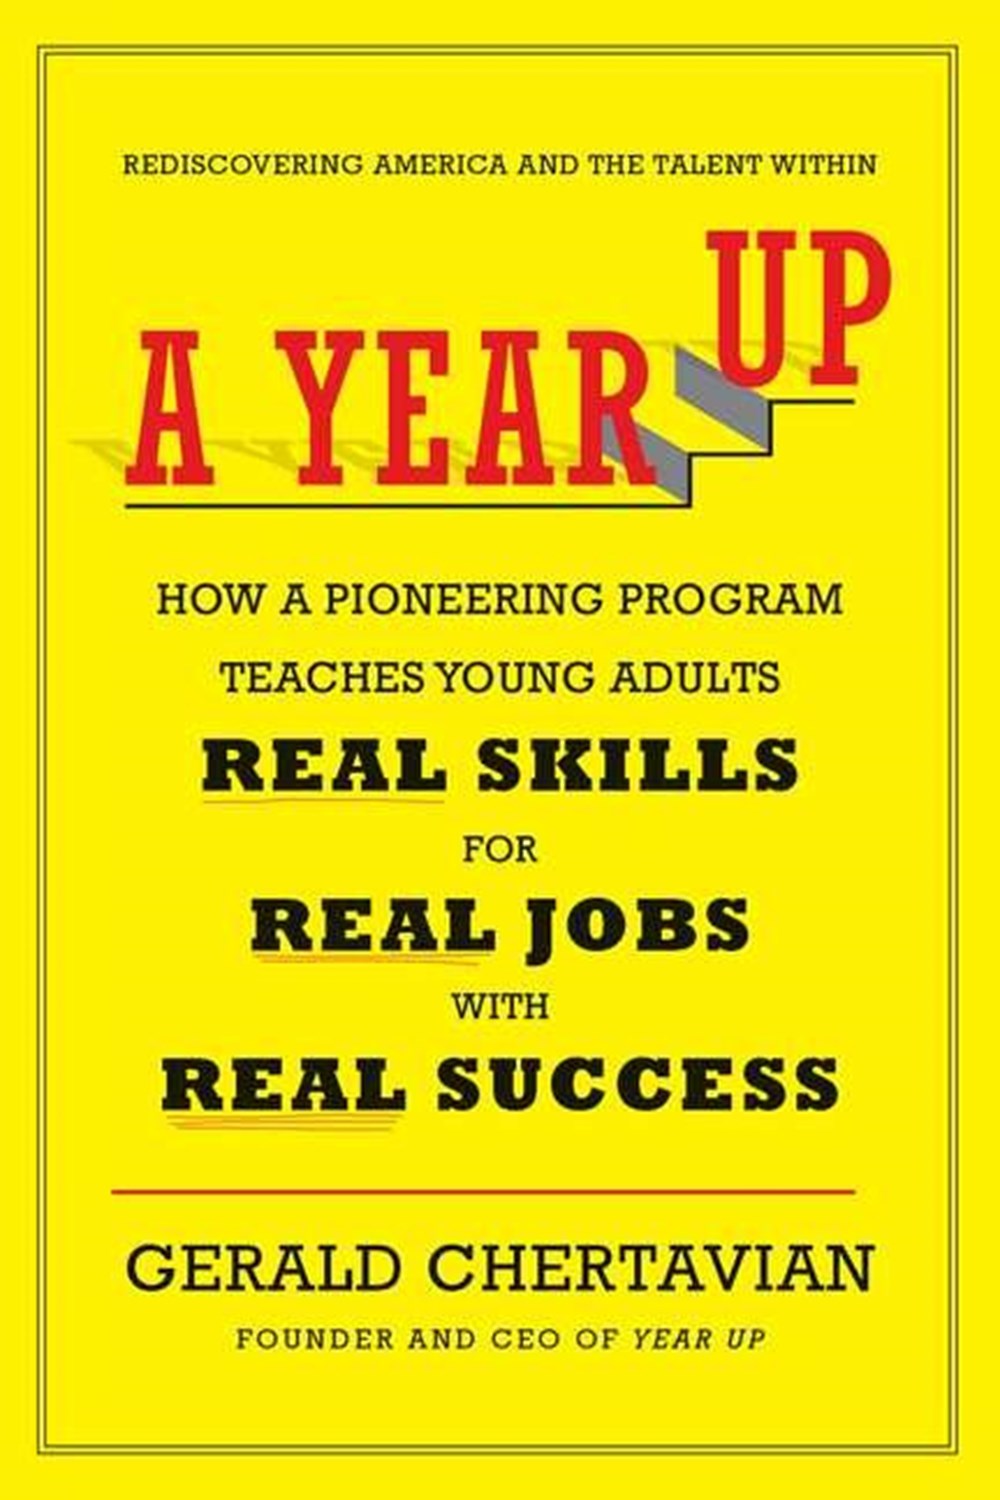 Year Up: How a Pioneering Program Teaches Young Adults Real Skills for Real Jobs-With Real Success